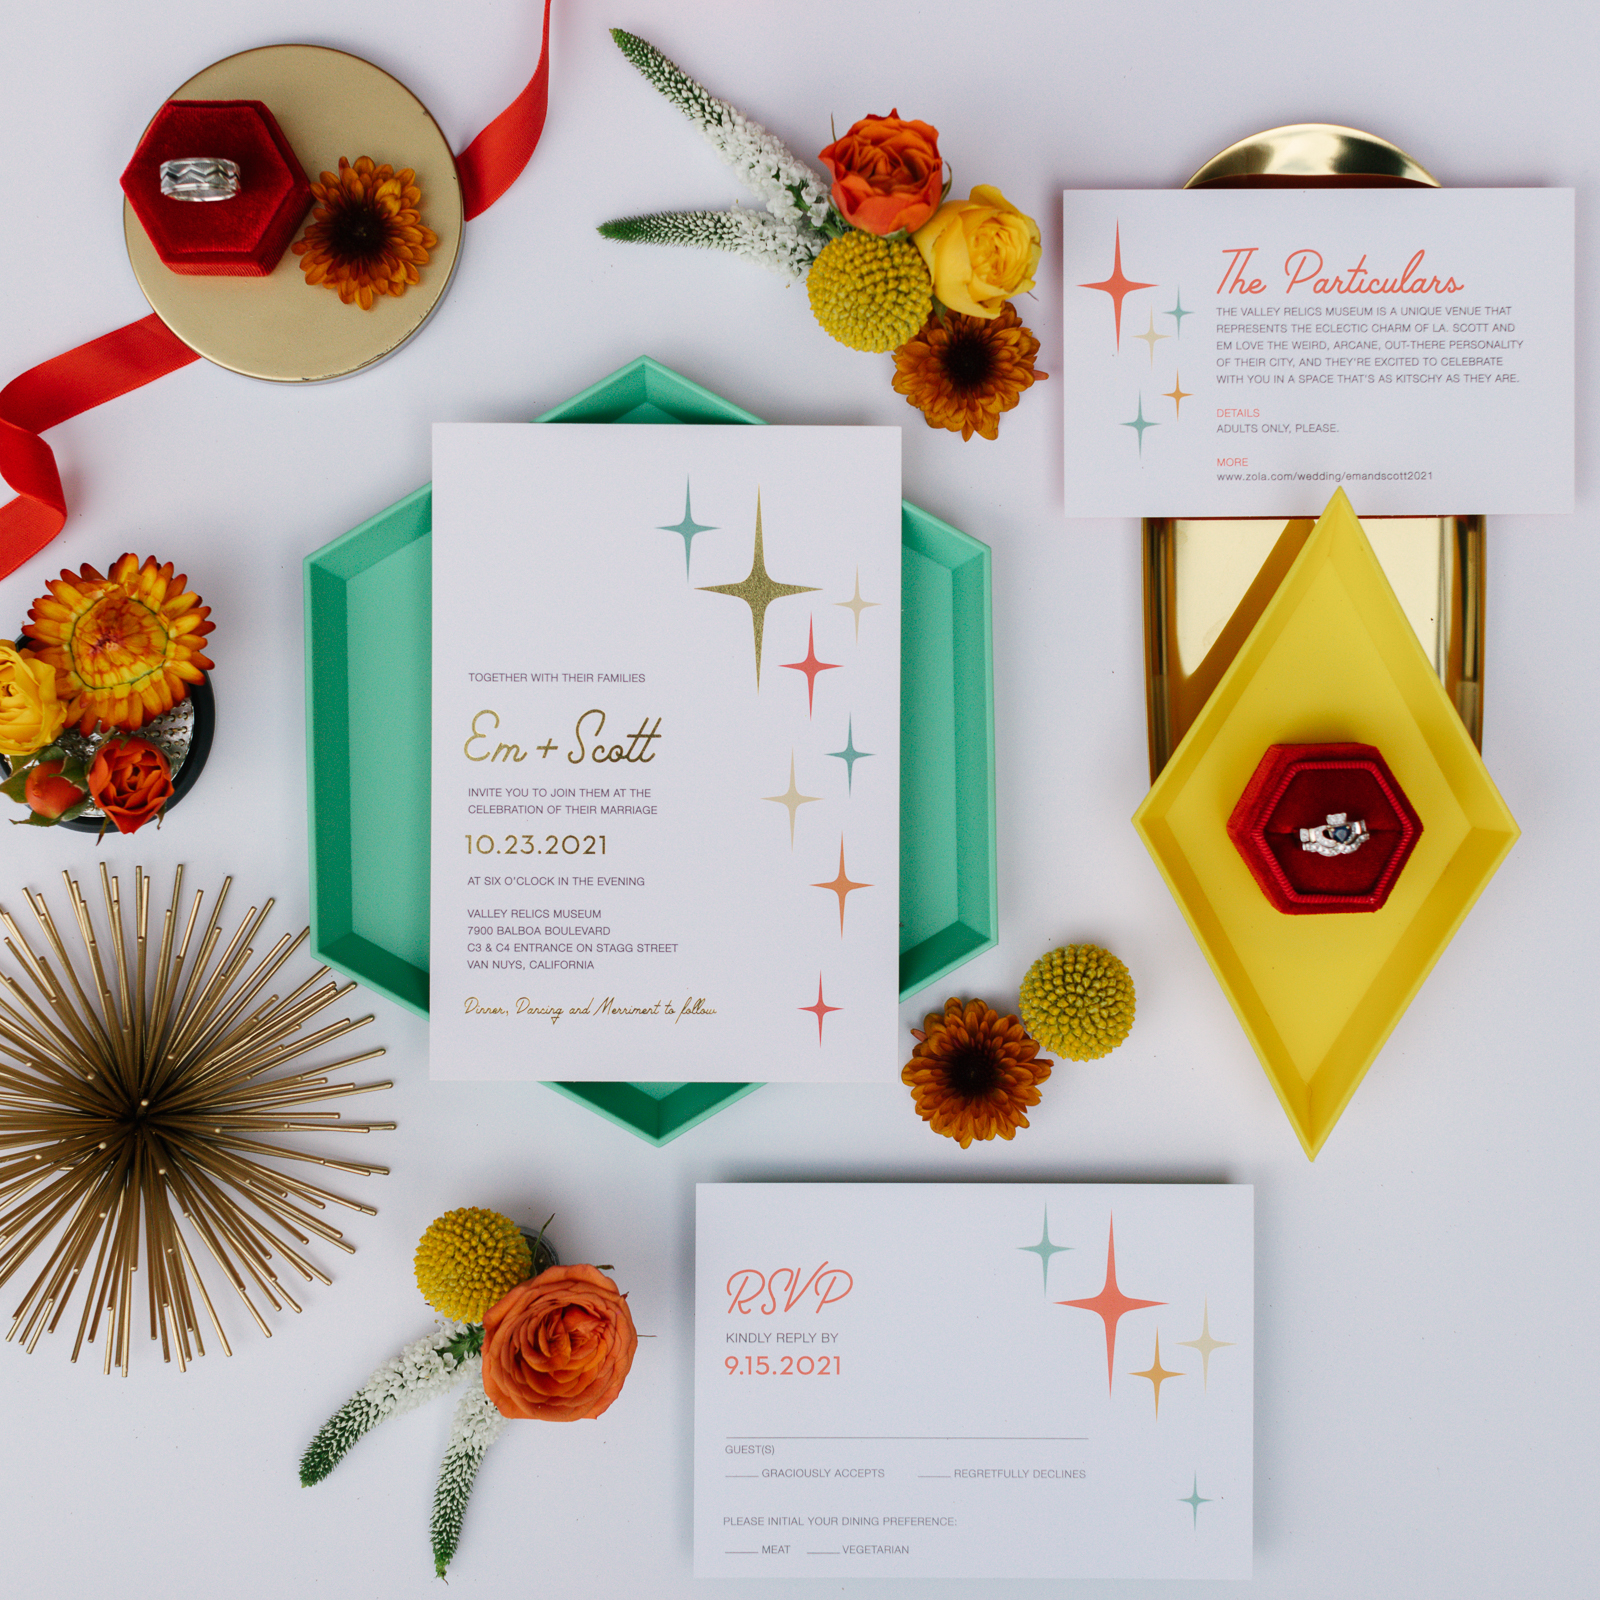 Eclectic Charm Wedding at The Valley Relics Museum - Invites